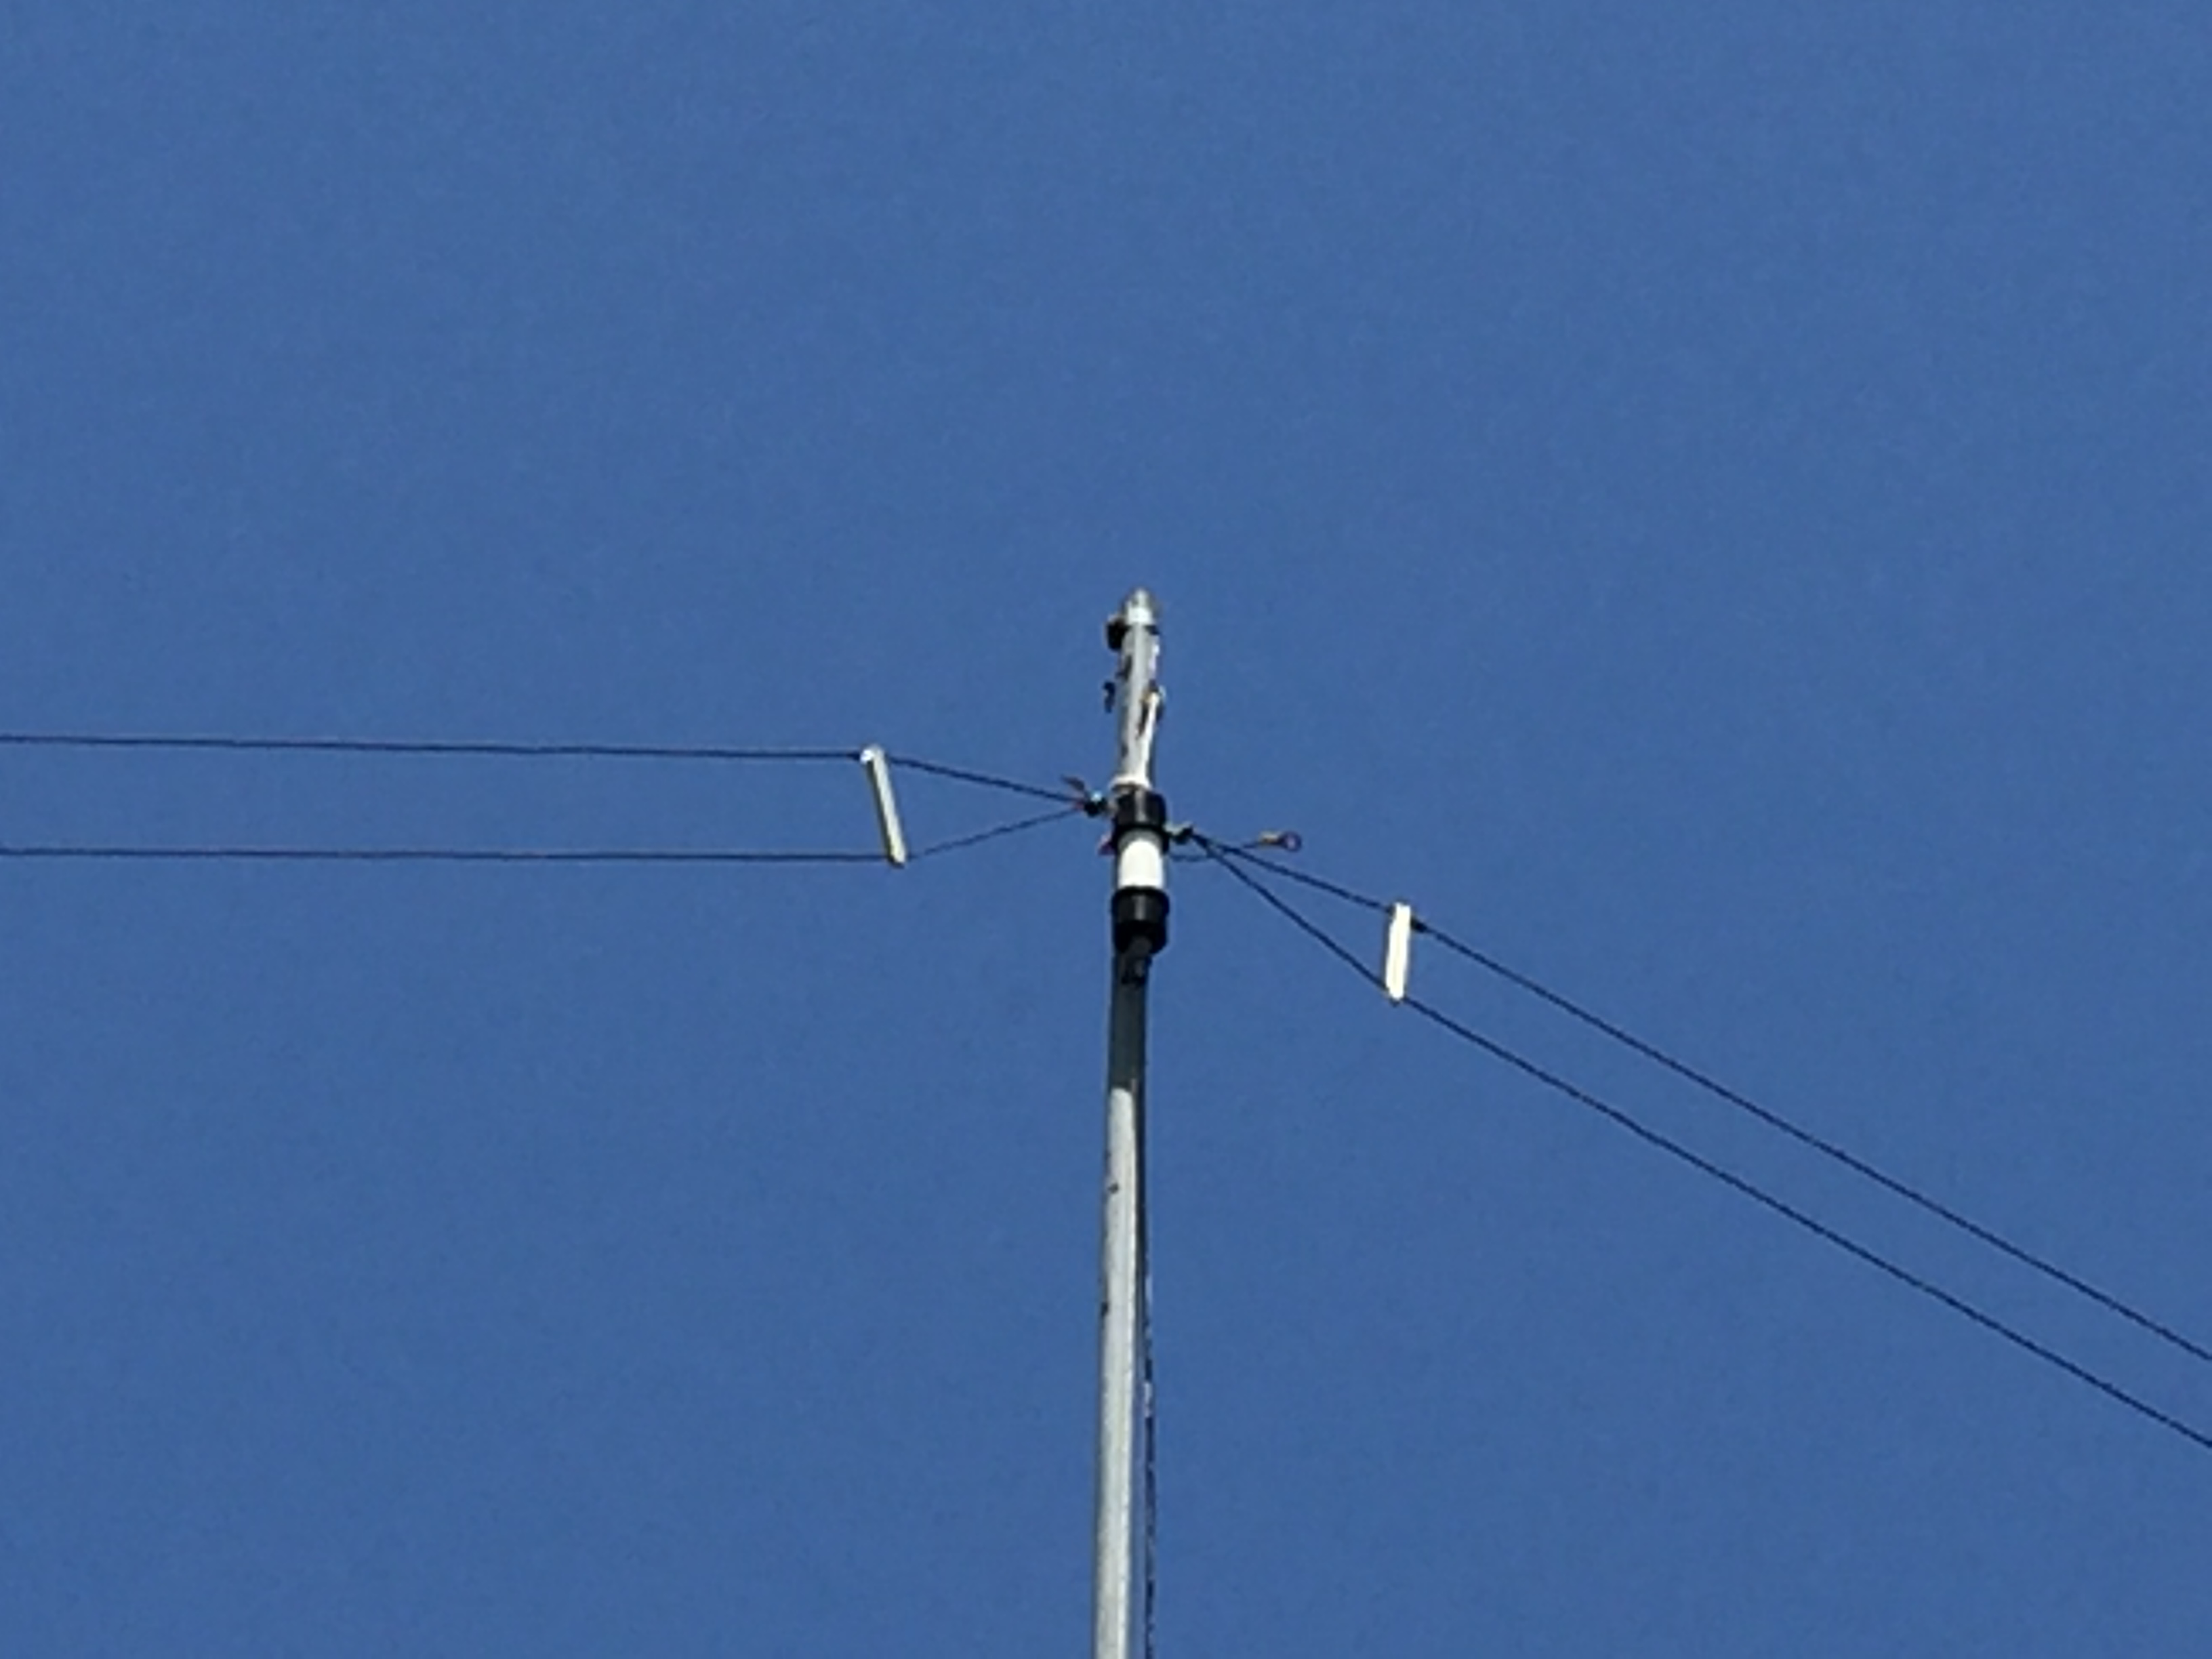 ham-radio-80-meter-coil-loaded-40-20-15-meter-half-wave-fan-dipole-antenna-first-element-spacer.png